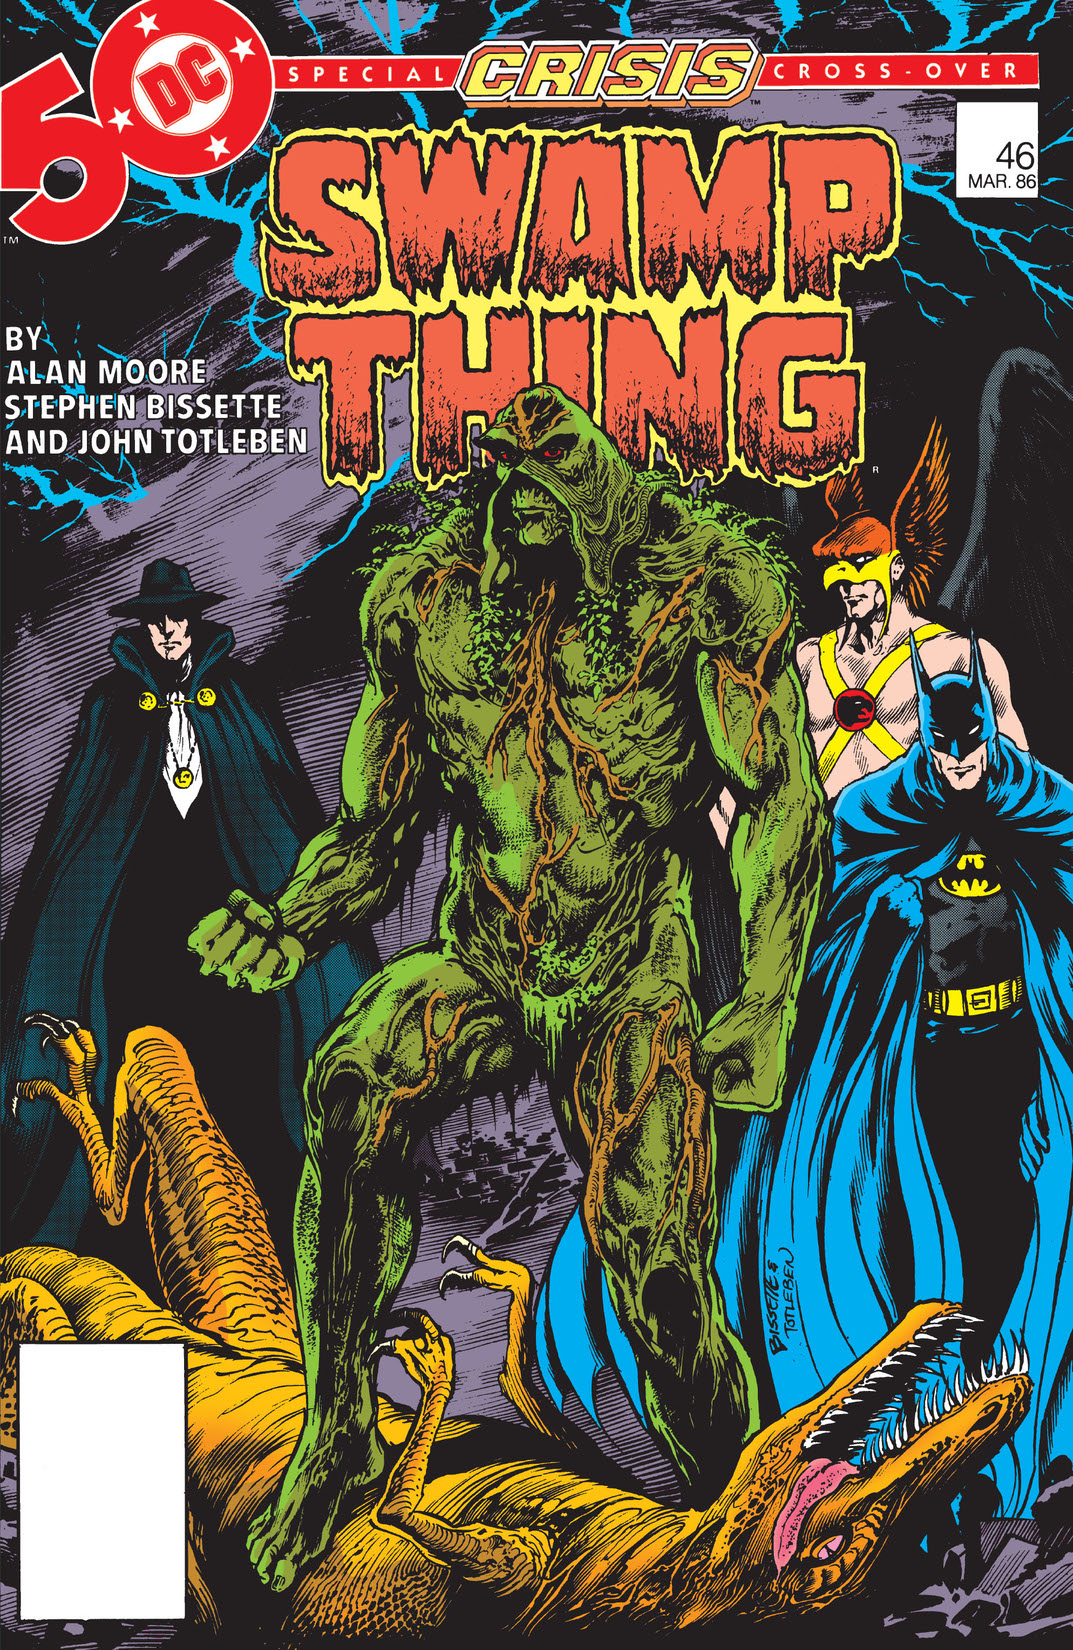 Swamp Thing (1985-) #46 preview images